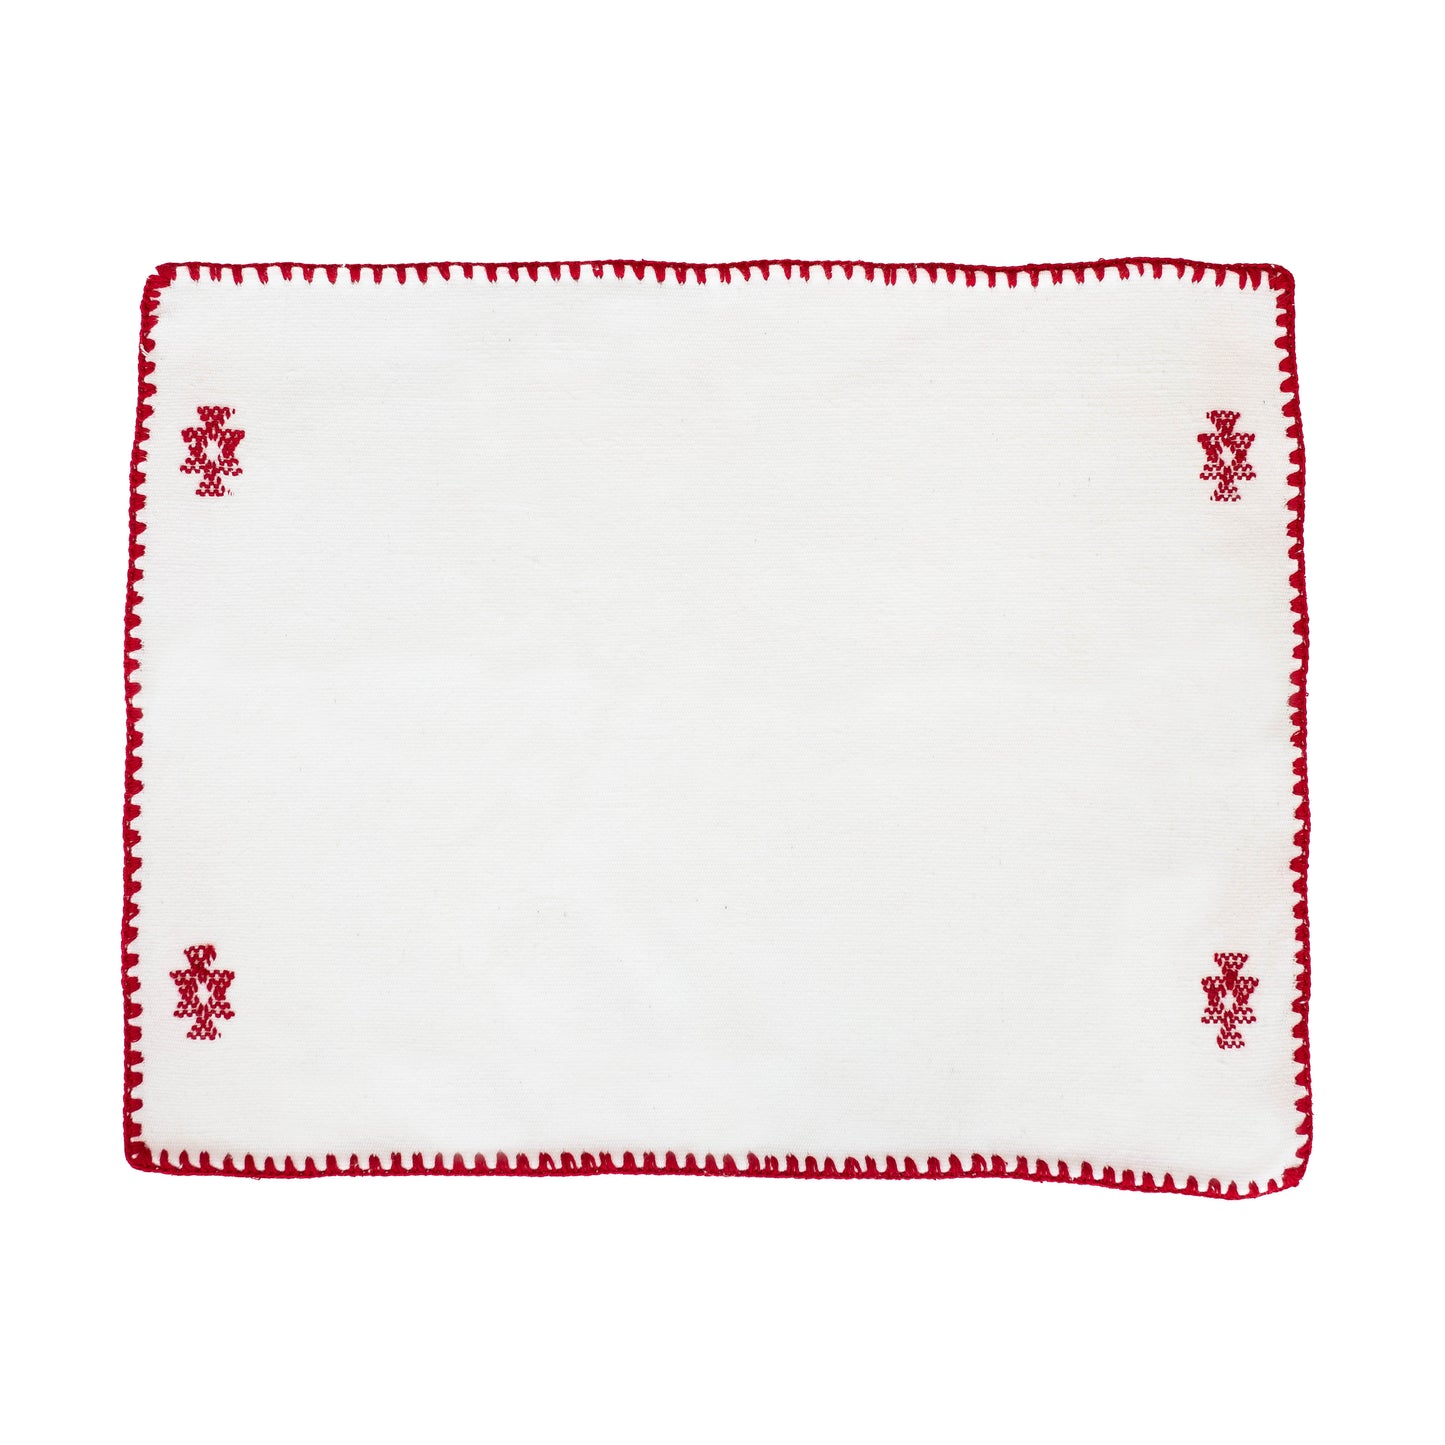 Red Flor Silvestre Handwoven Placemat (Set of 2)